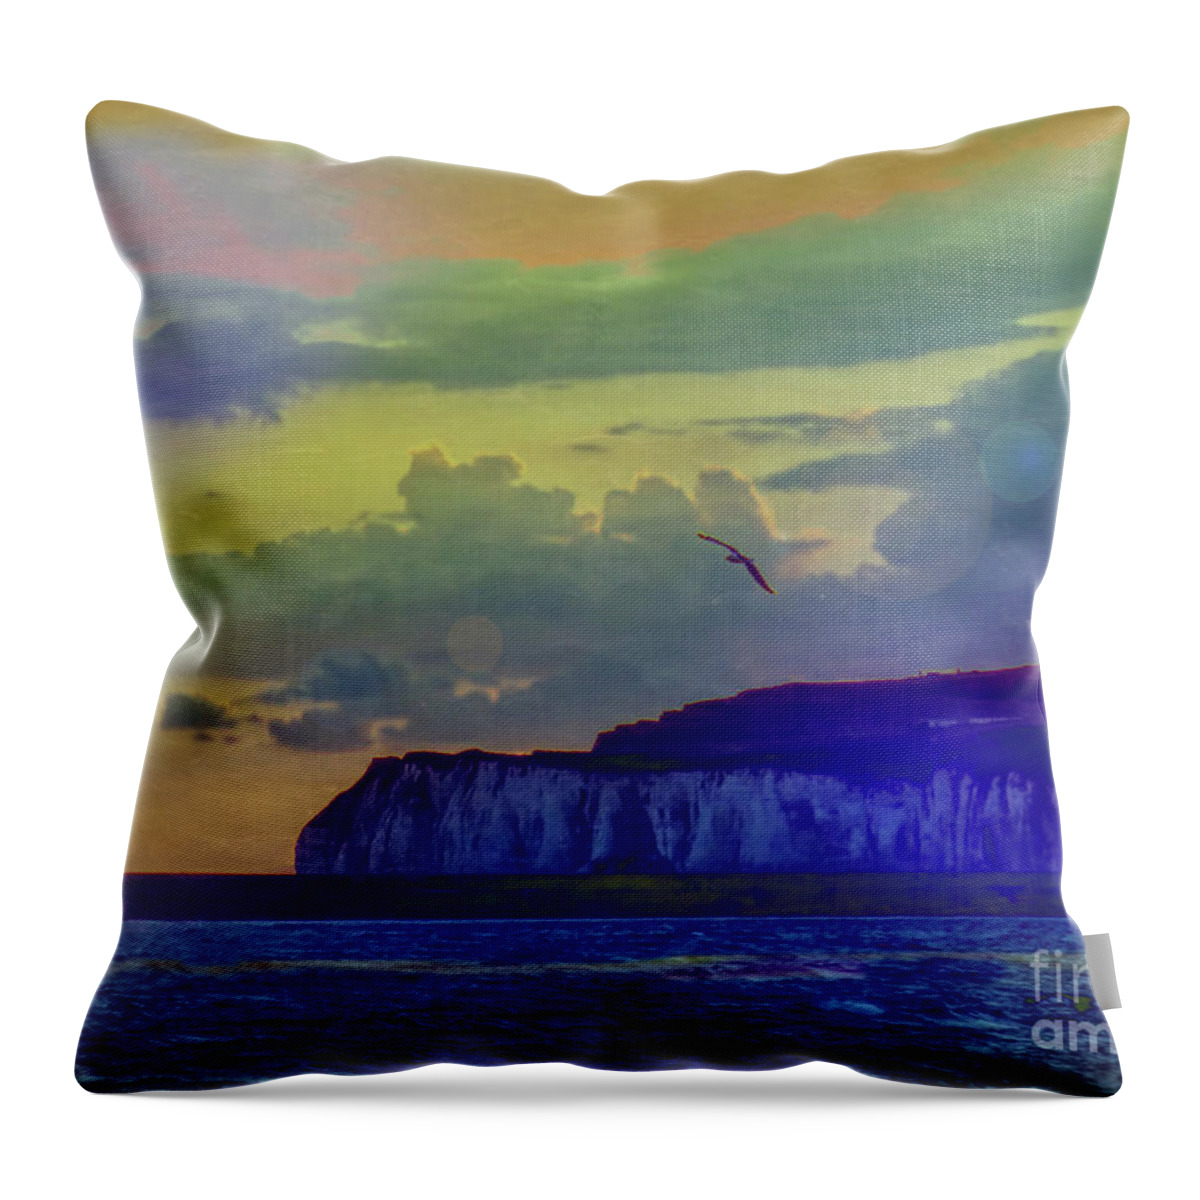 Lighthouse Throw Pillow featuring the photograph The Lighthouse by LemonArt Photography